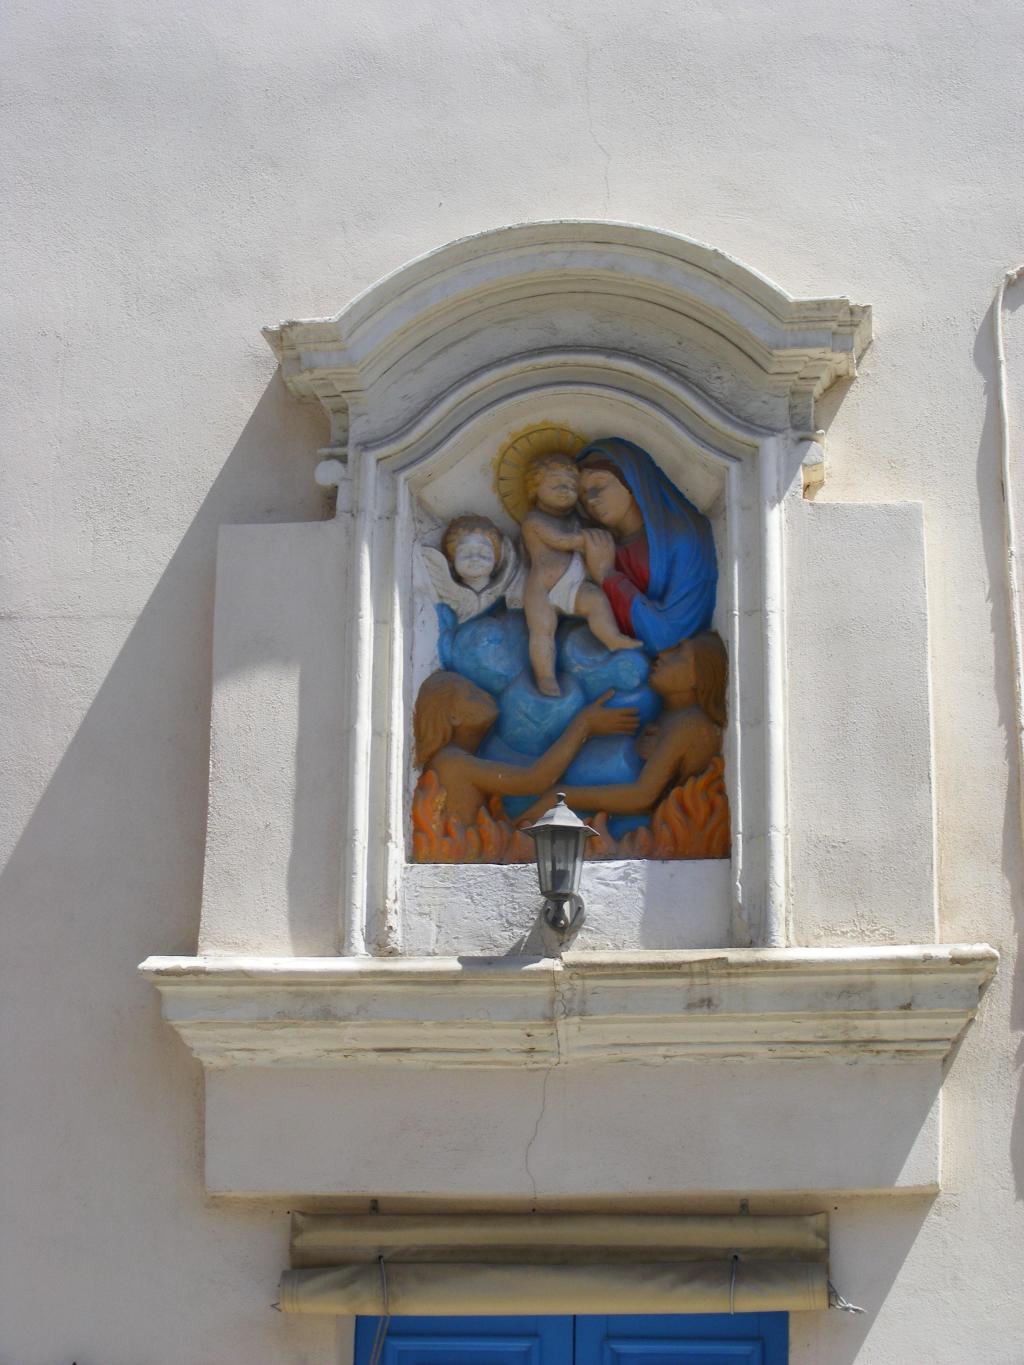 Relief-of-Madonna-and-Child-and-Souls-in-Purgatory-in-Qormi.-Wikimedia-commons.jpeg